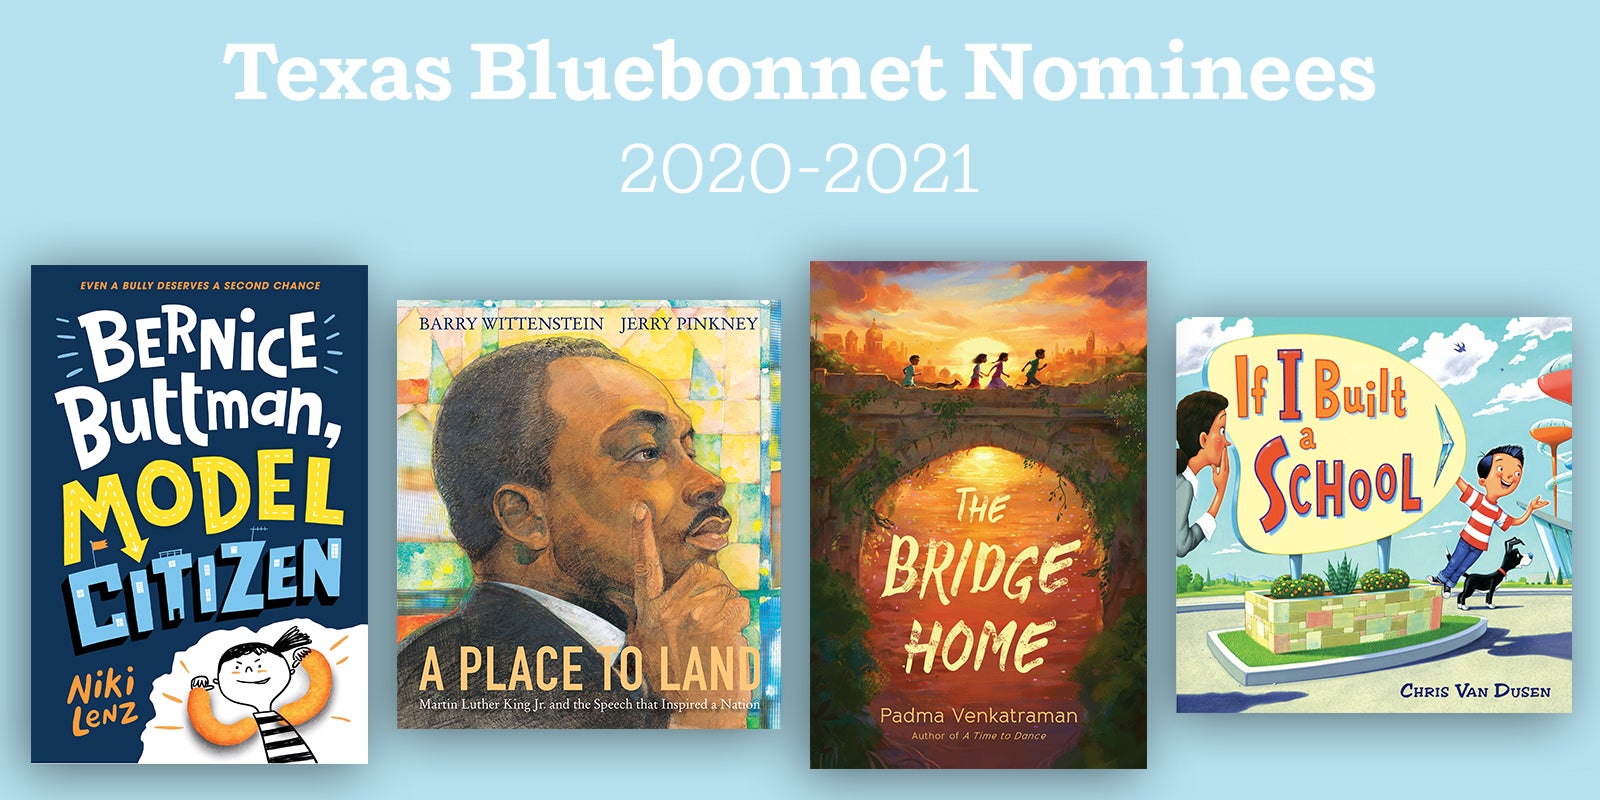 The Texas Bluebonnet Award Nominees for 2020-2021 have been announced!